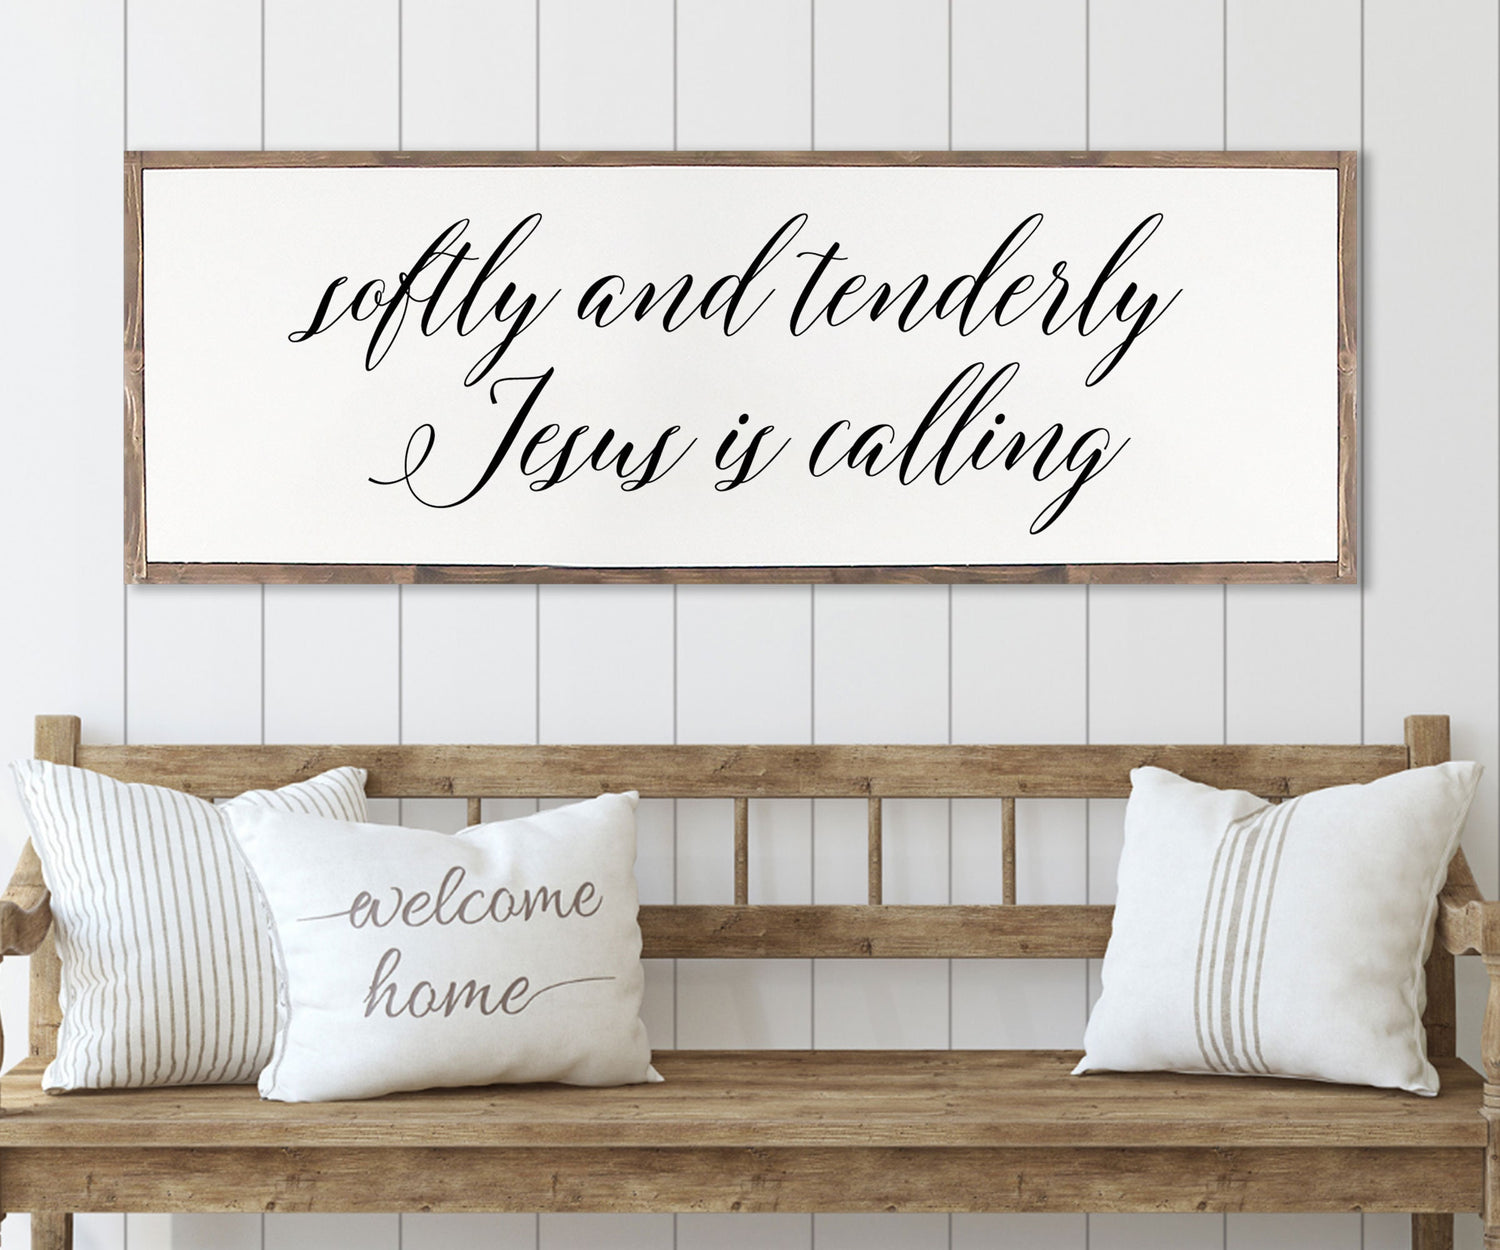 Softly And Tenderly Jesus Is Calling Sign Farmhouse | CHRISTIAN WALL ART | framed Wood Sign | Home Decor | Jesus is Calling | Farmhouse Sign